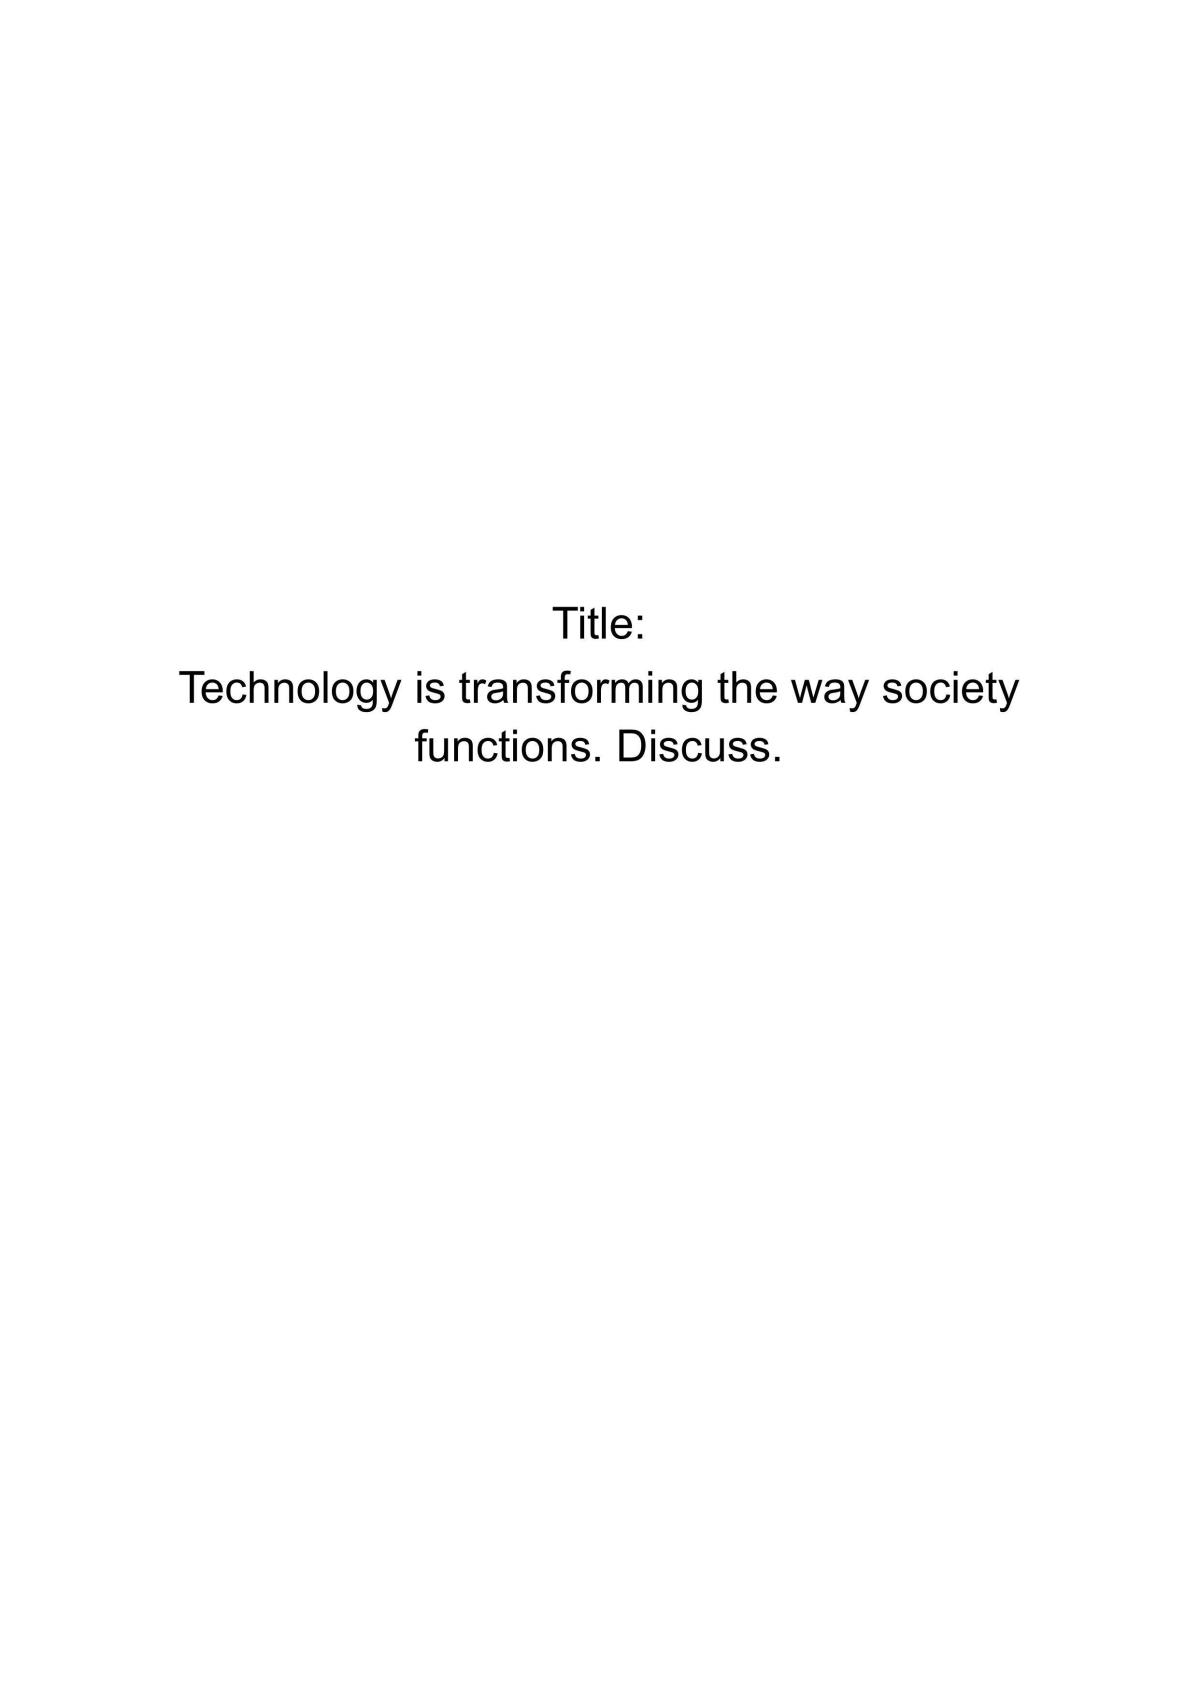 Technology is transforming the way society functions. Discuss. - Page 1